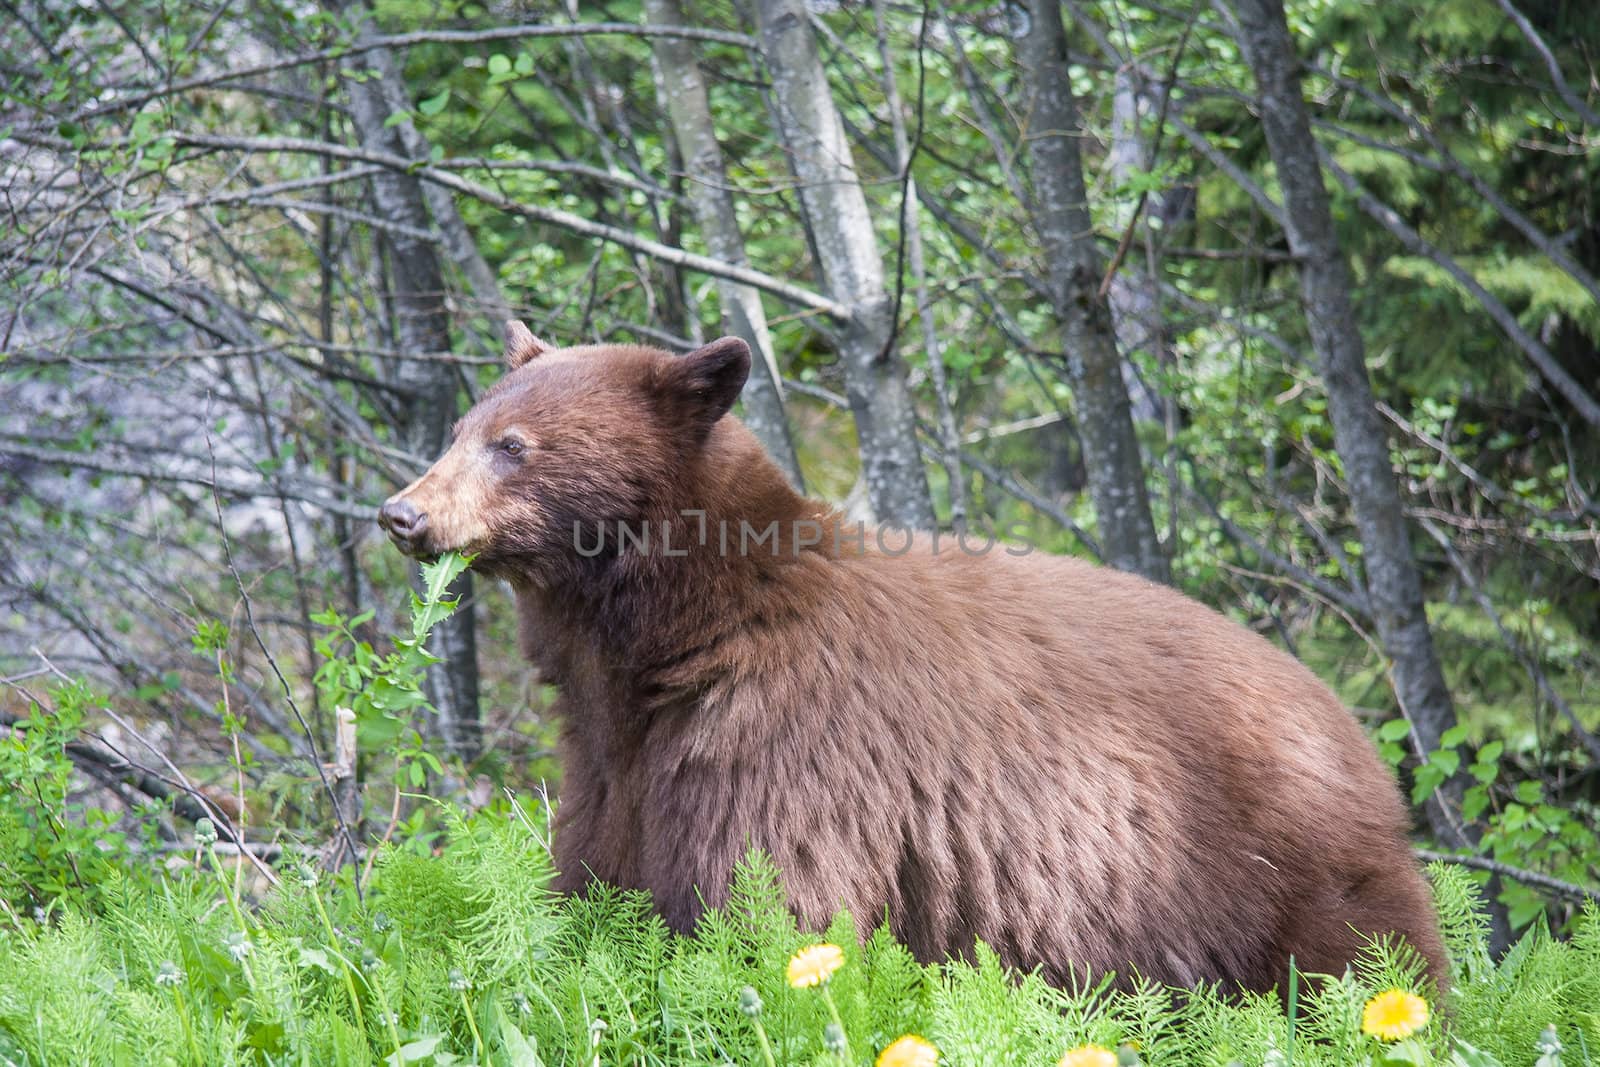 Large Brown Bear foraging in the forest